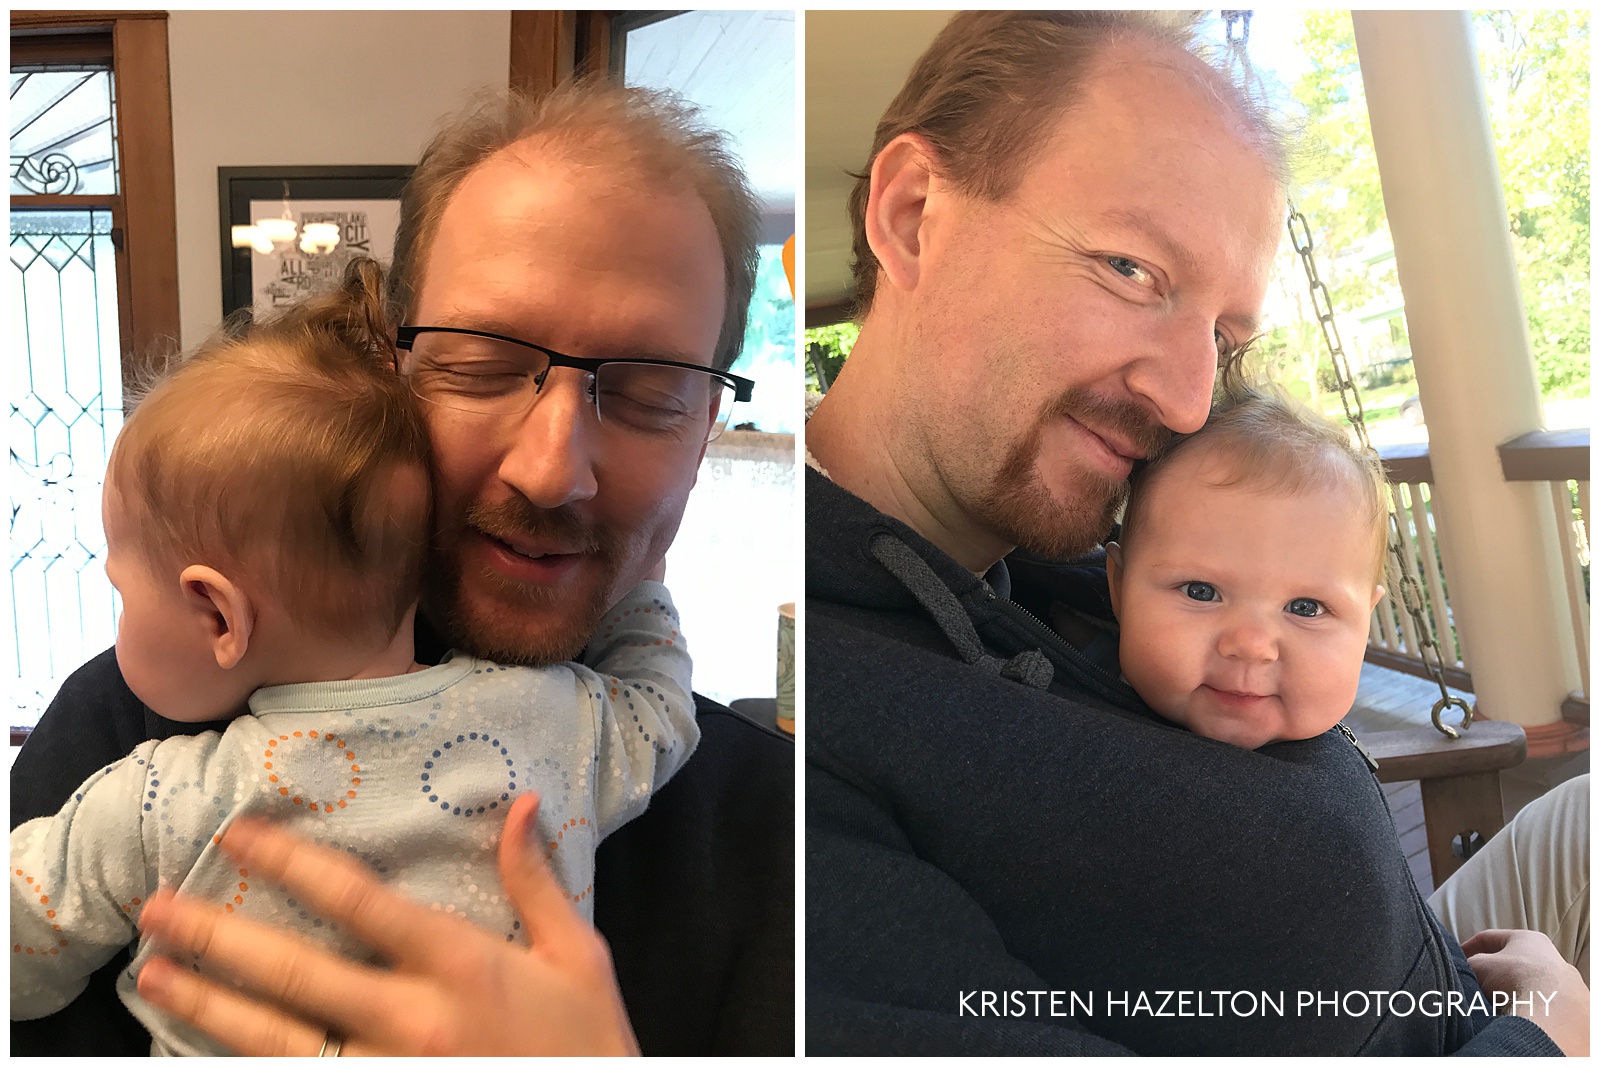 5-month old baby hugging Dad, and wrapped up in his sweatshirt